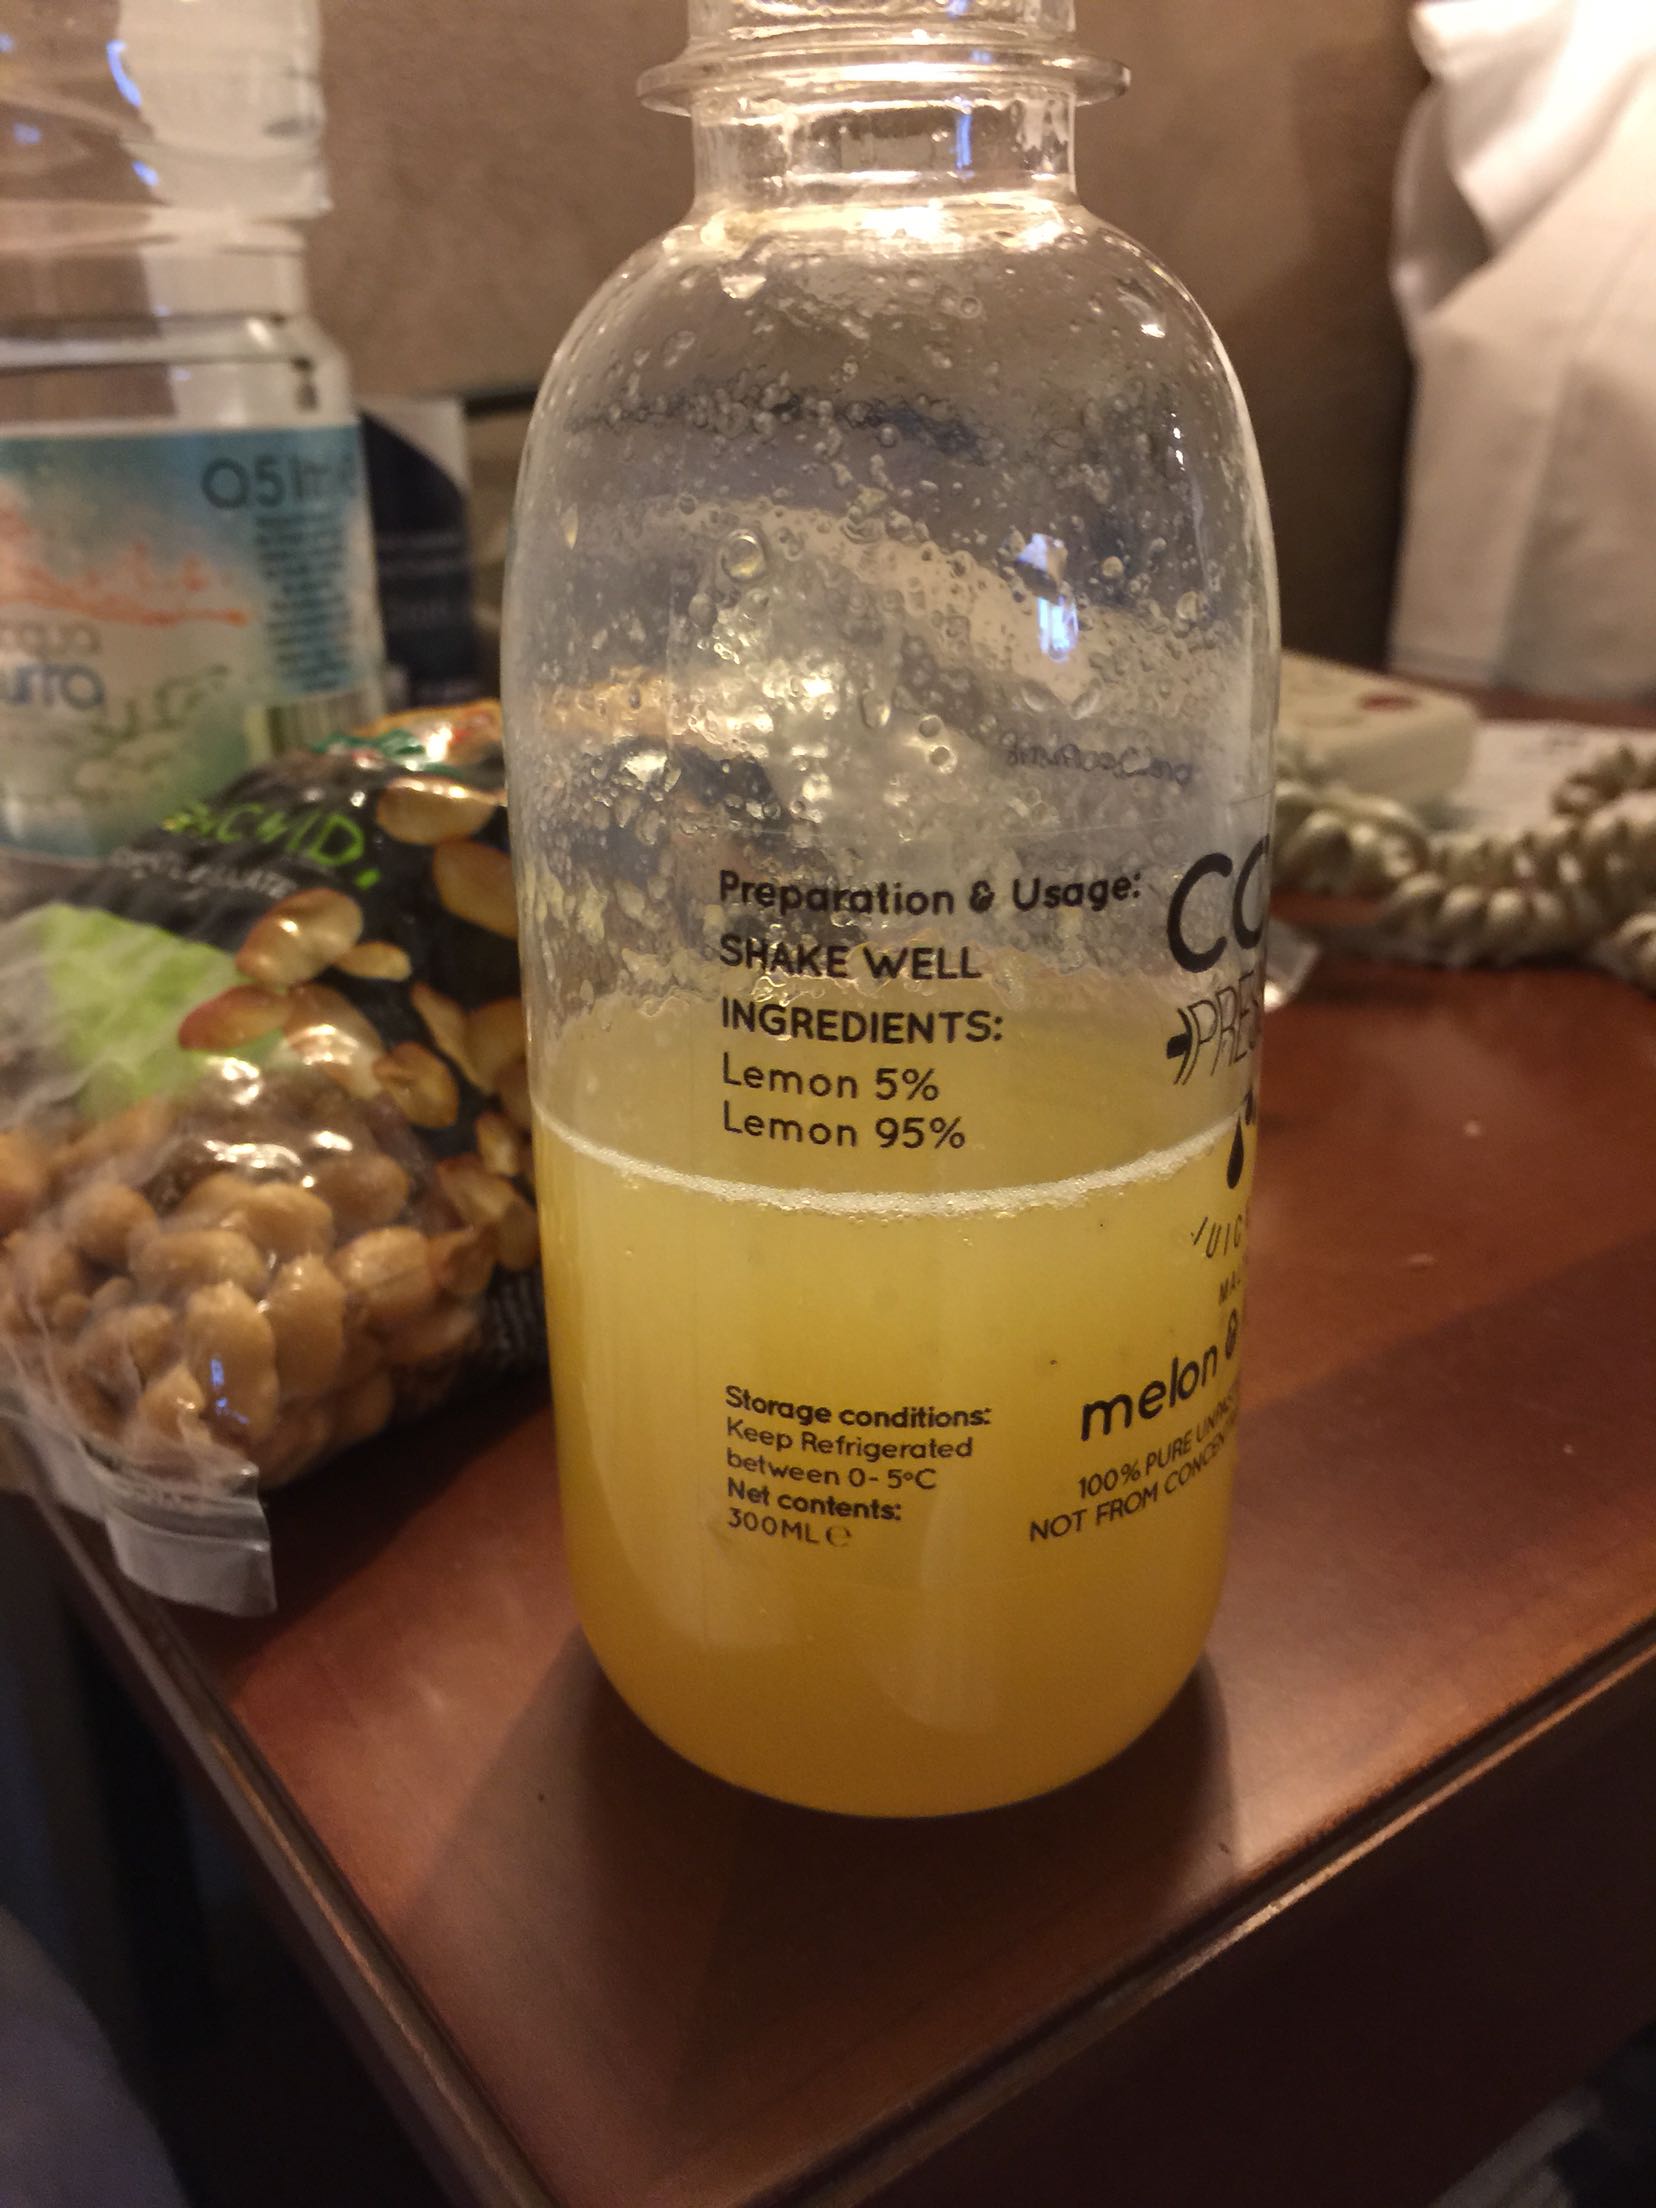 mom found piss bottle - Preparation & Usage Shake Well Ingredients Lemon 5% Lemon 95% Torage conditions Keep Refrigerated between 05C melon Net contents 300ML 100% Pure La From Cowo Not From